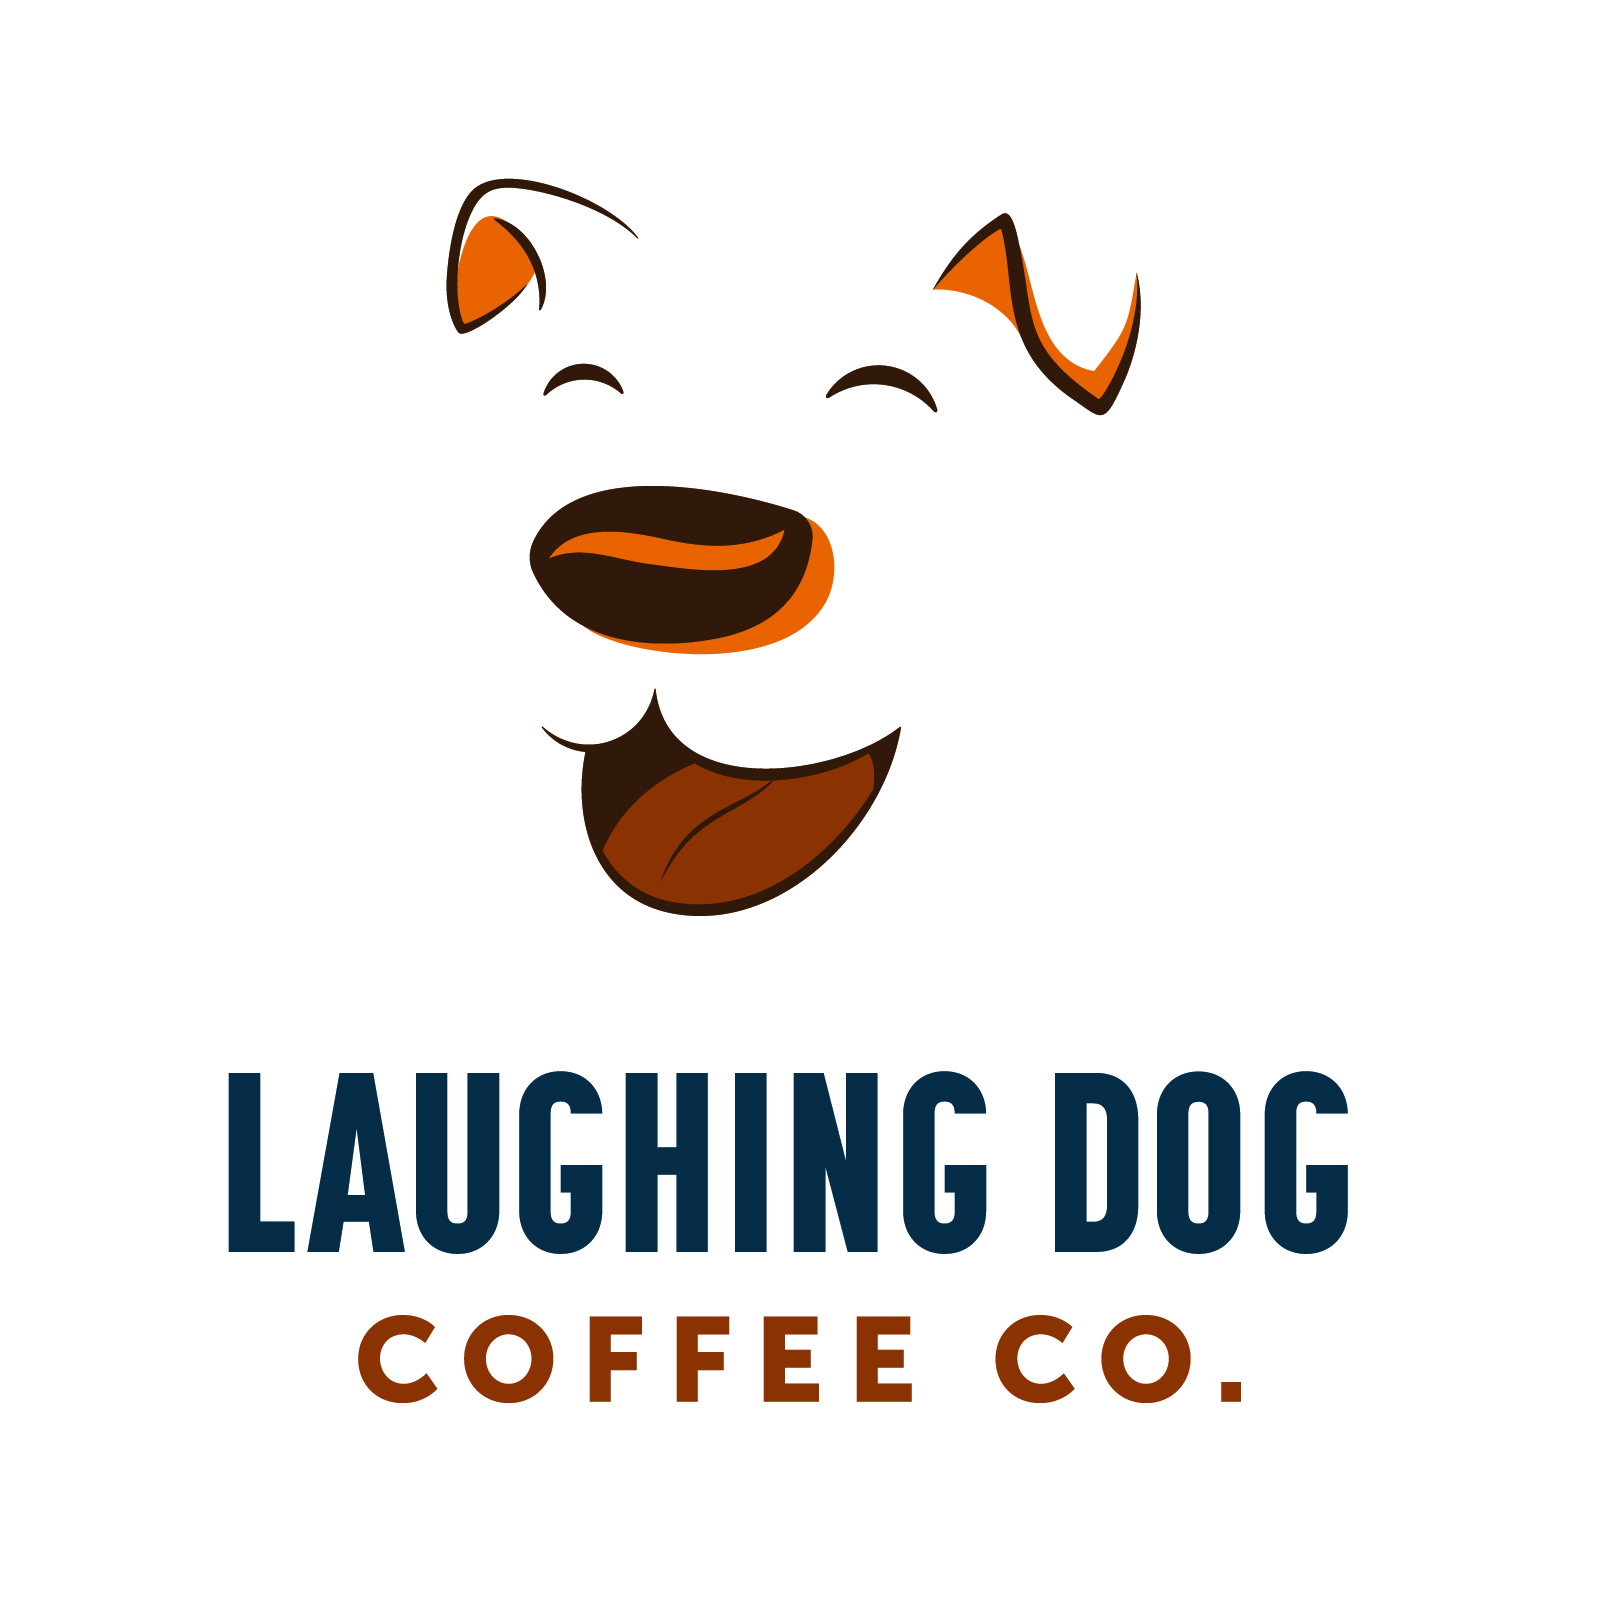 laughing dog coffee co logo by Great Big Graphics